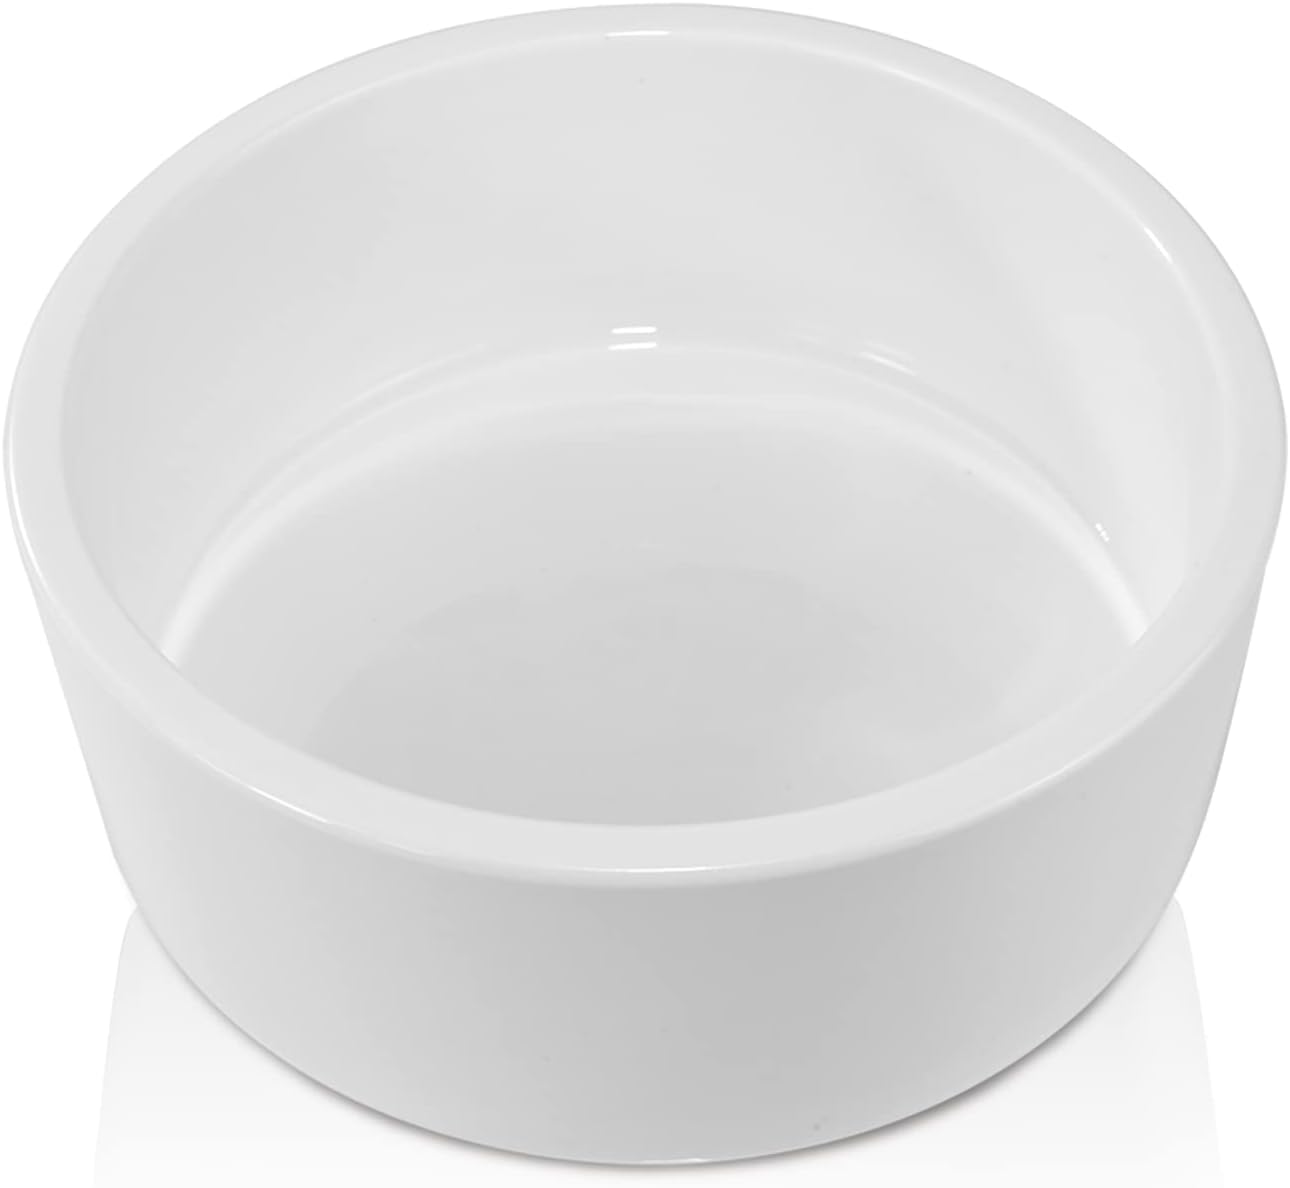 Large Sublimation Pet bowl 7 x 3 inches with AAA Coating -  | Reinforced Styrofoam Packaging"